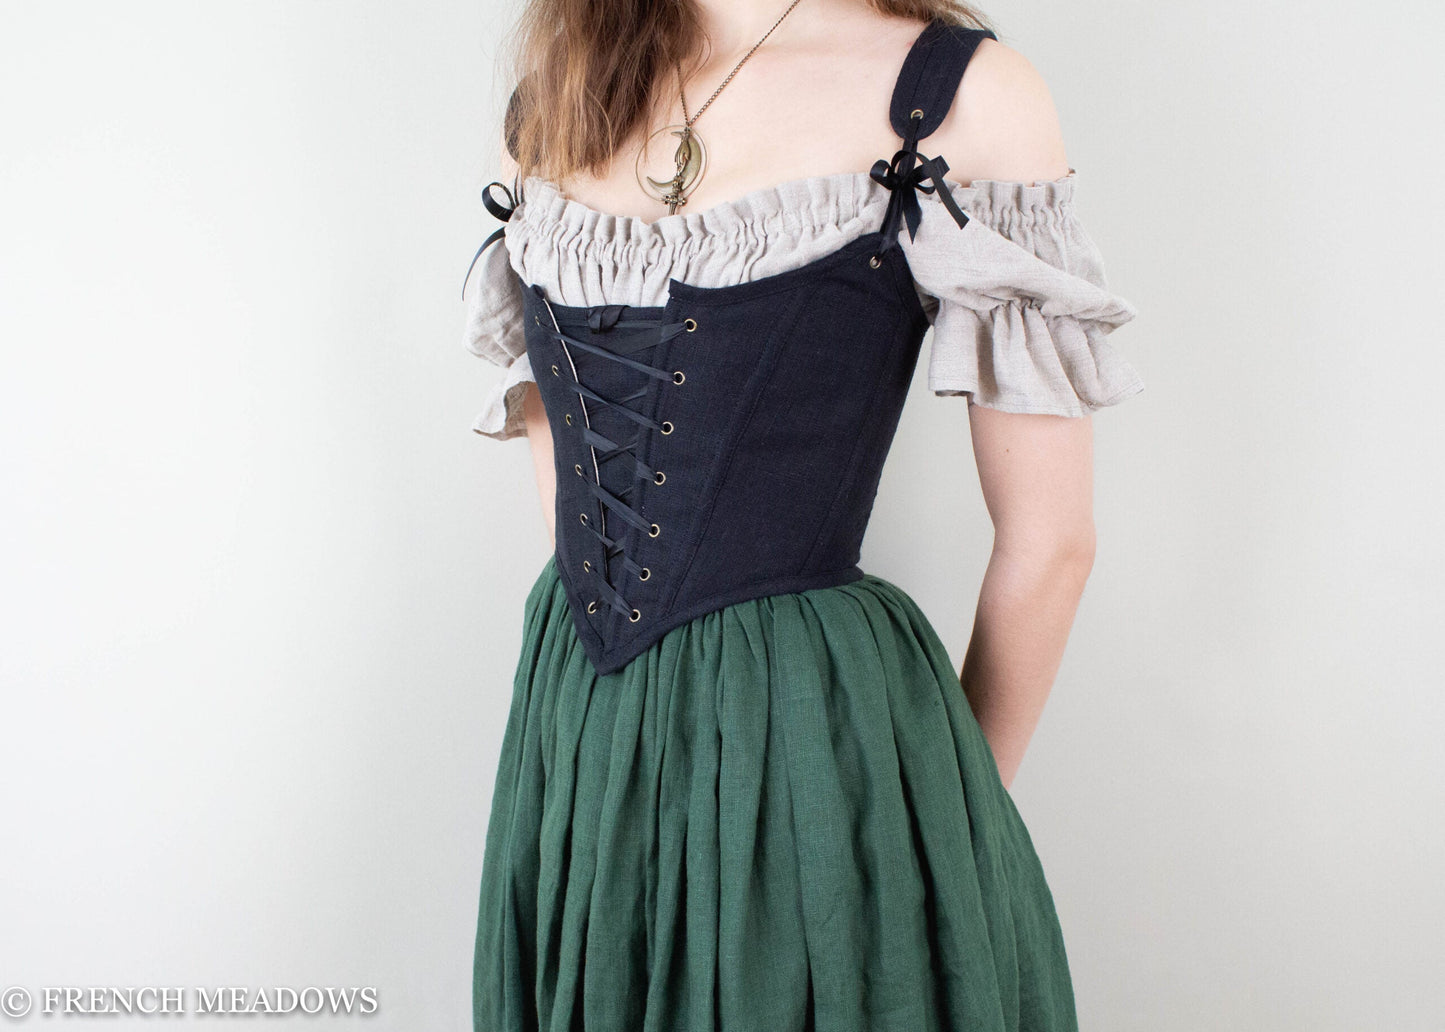 modeling wearing a black corset top paired with a green linen skirt